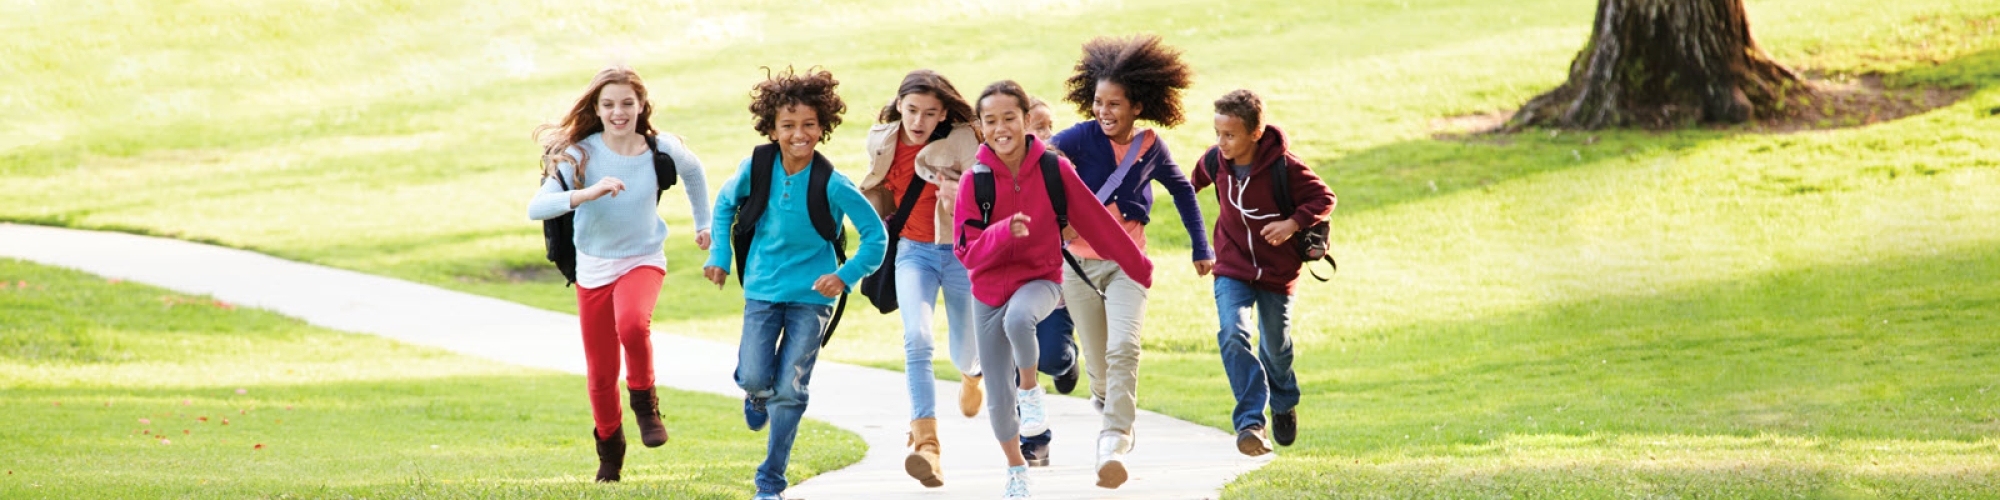 Students running outside